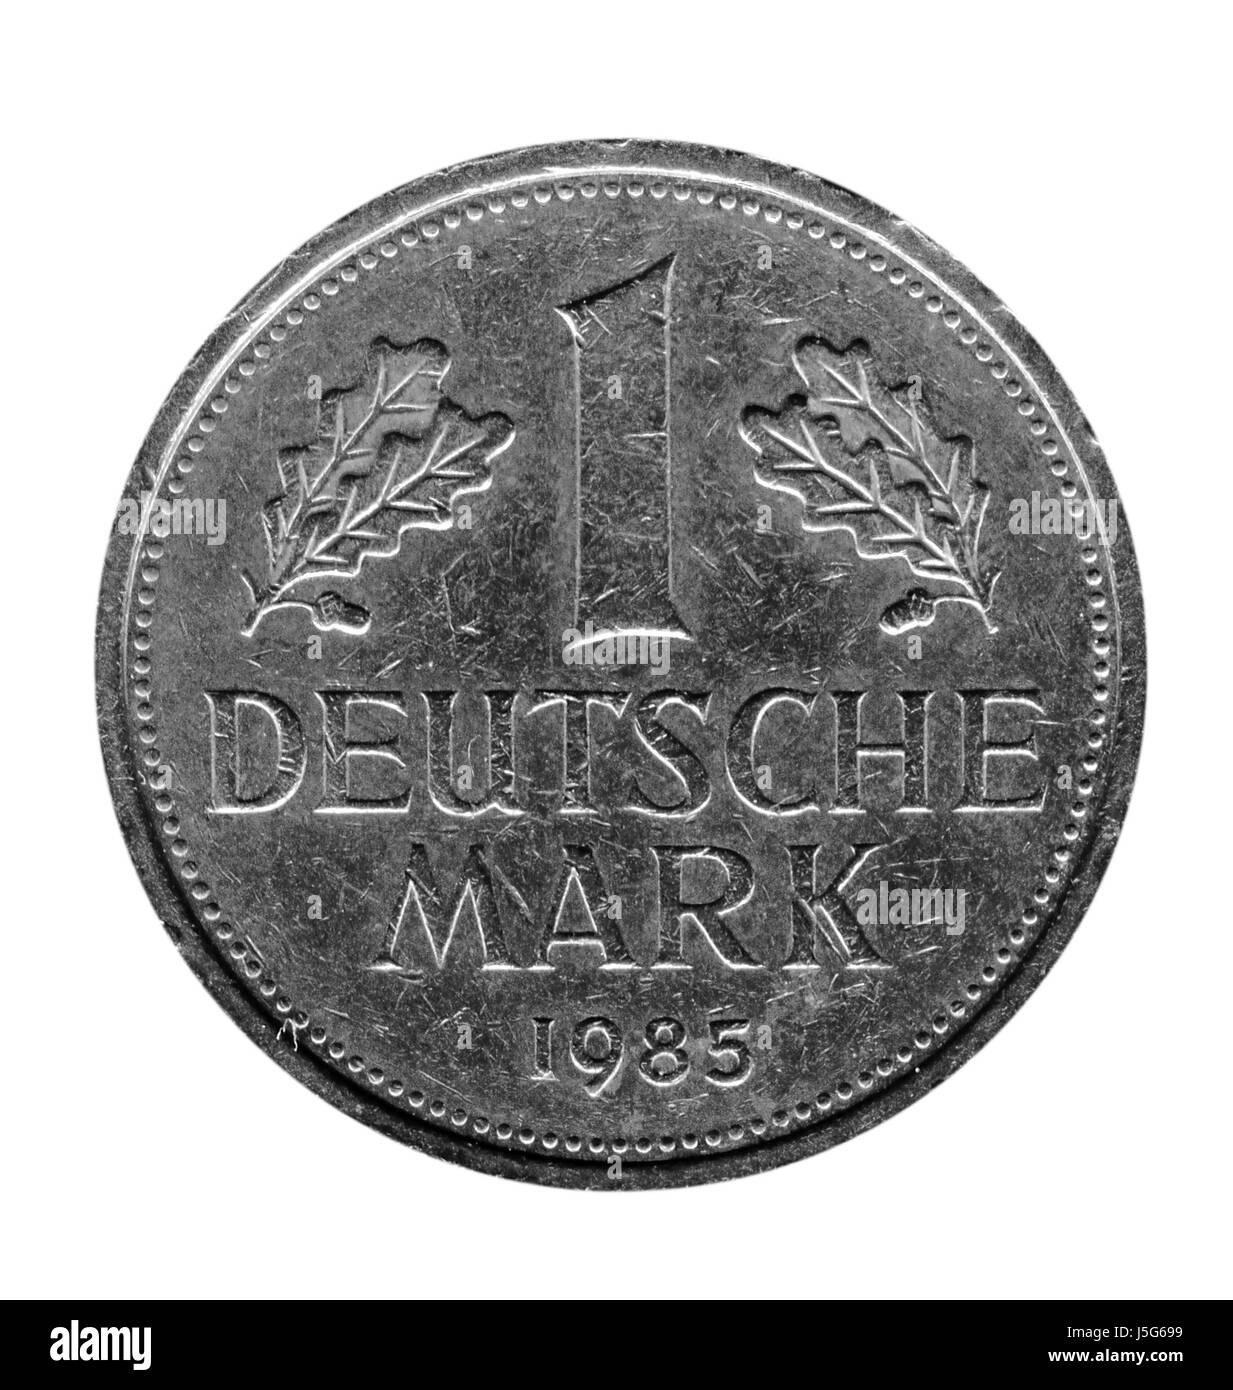 pay euro currency count owe debtor monetary union money scratch old deutsche Stock Photo